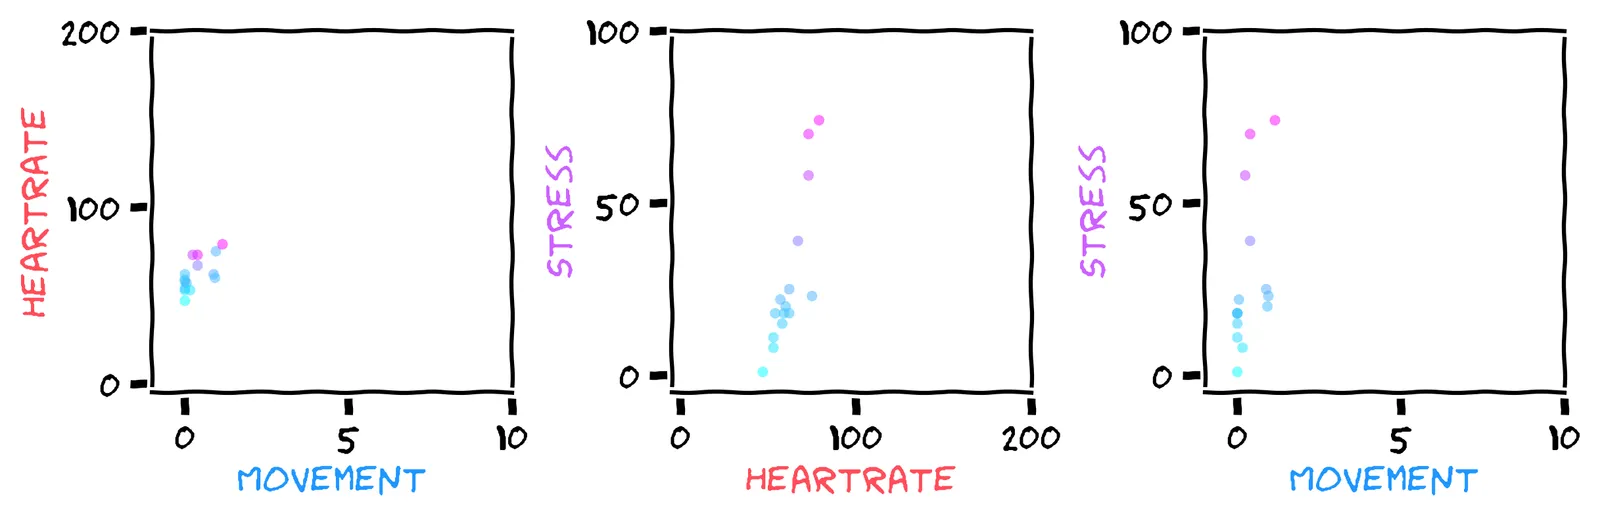 Three scatter plots. The left shows heartrate vs movement. The middle shows stress vs heartrate. The right shows stress vs movement. The middle plot has a fairly linear relationship between stress and heartrate.